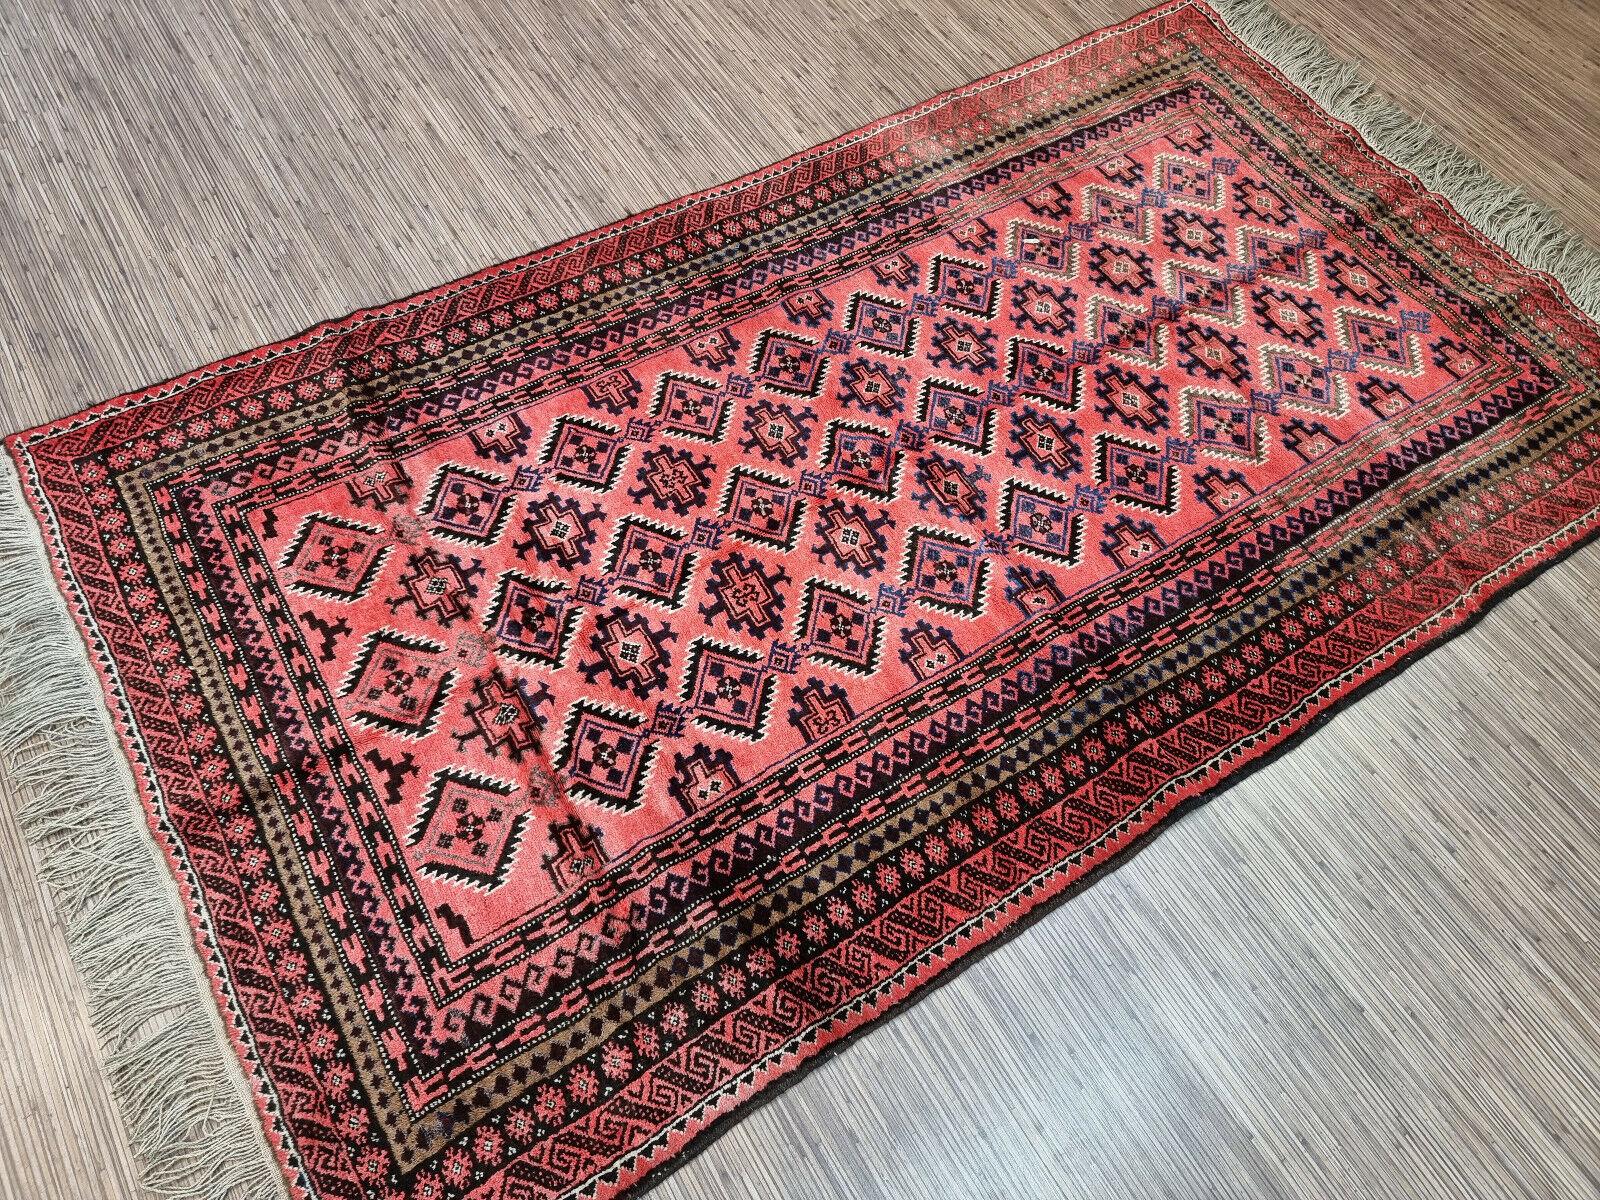 Handmade Vintage Afghan Baluch Prayer Rug 2.4' x 4.7', 1960s - 1D94 In Good Condition For Sale In Bordeaux, FR